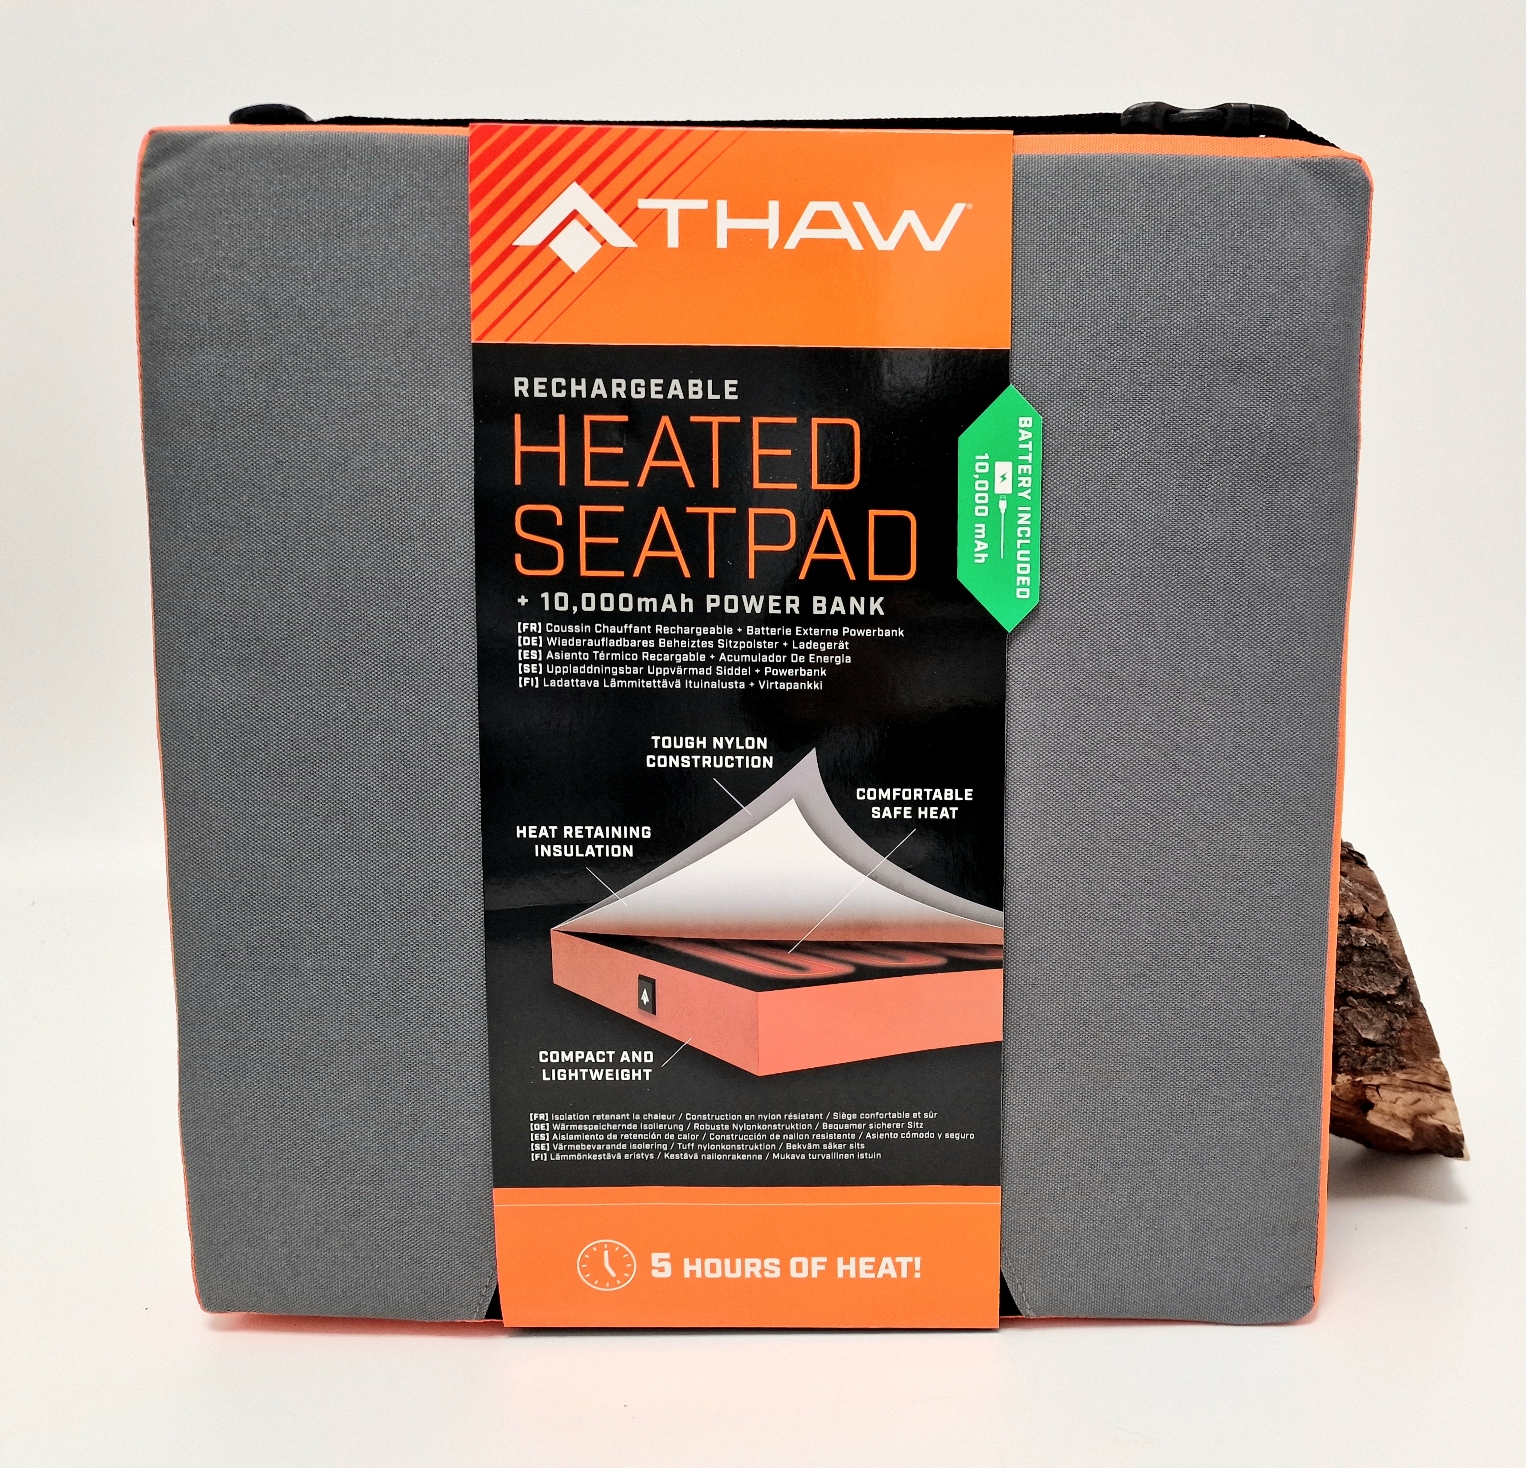 THAW Rechargeable Heated Seatpad Beheizbares Sitzkissen incl